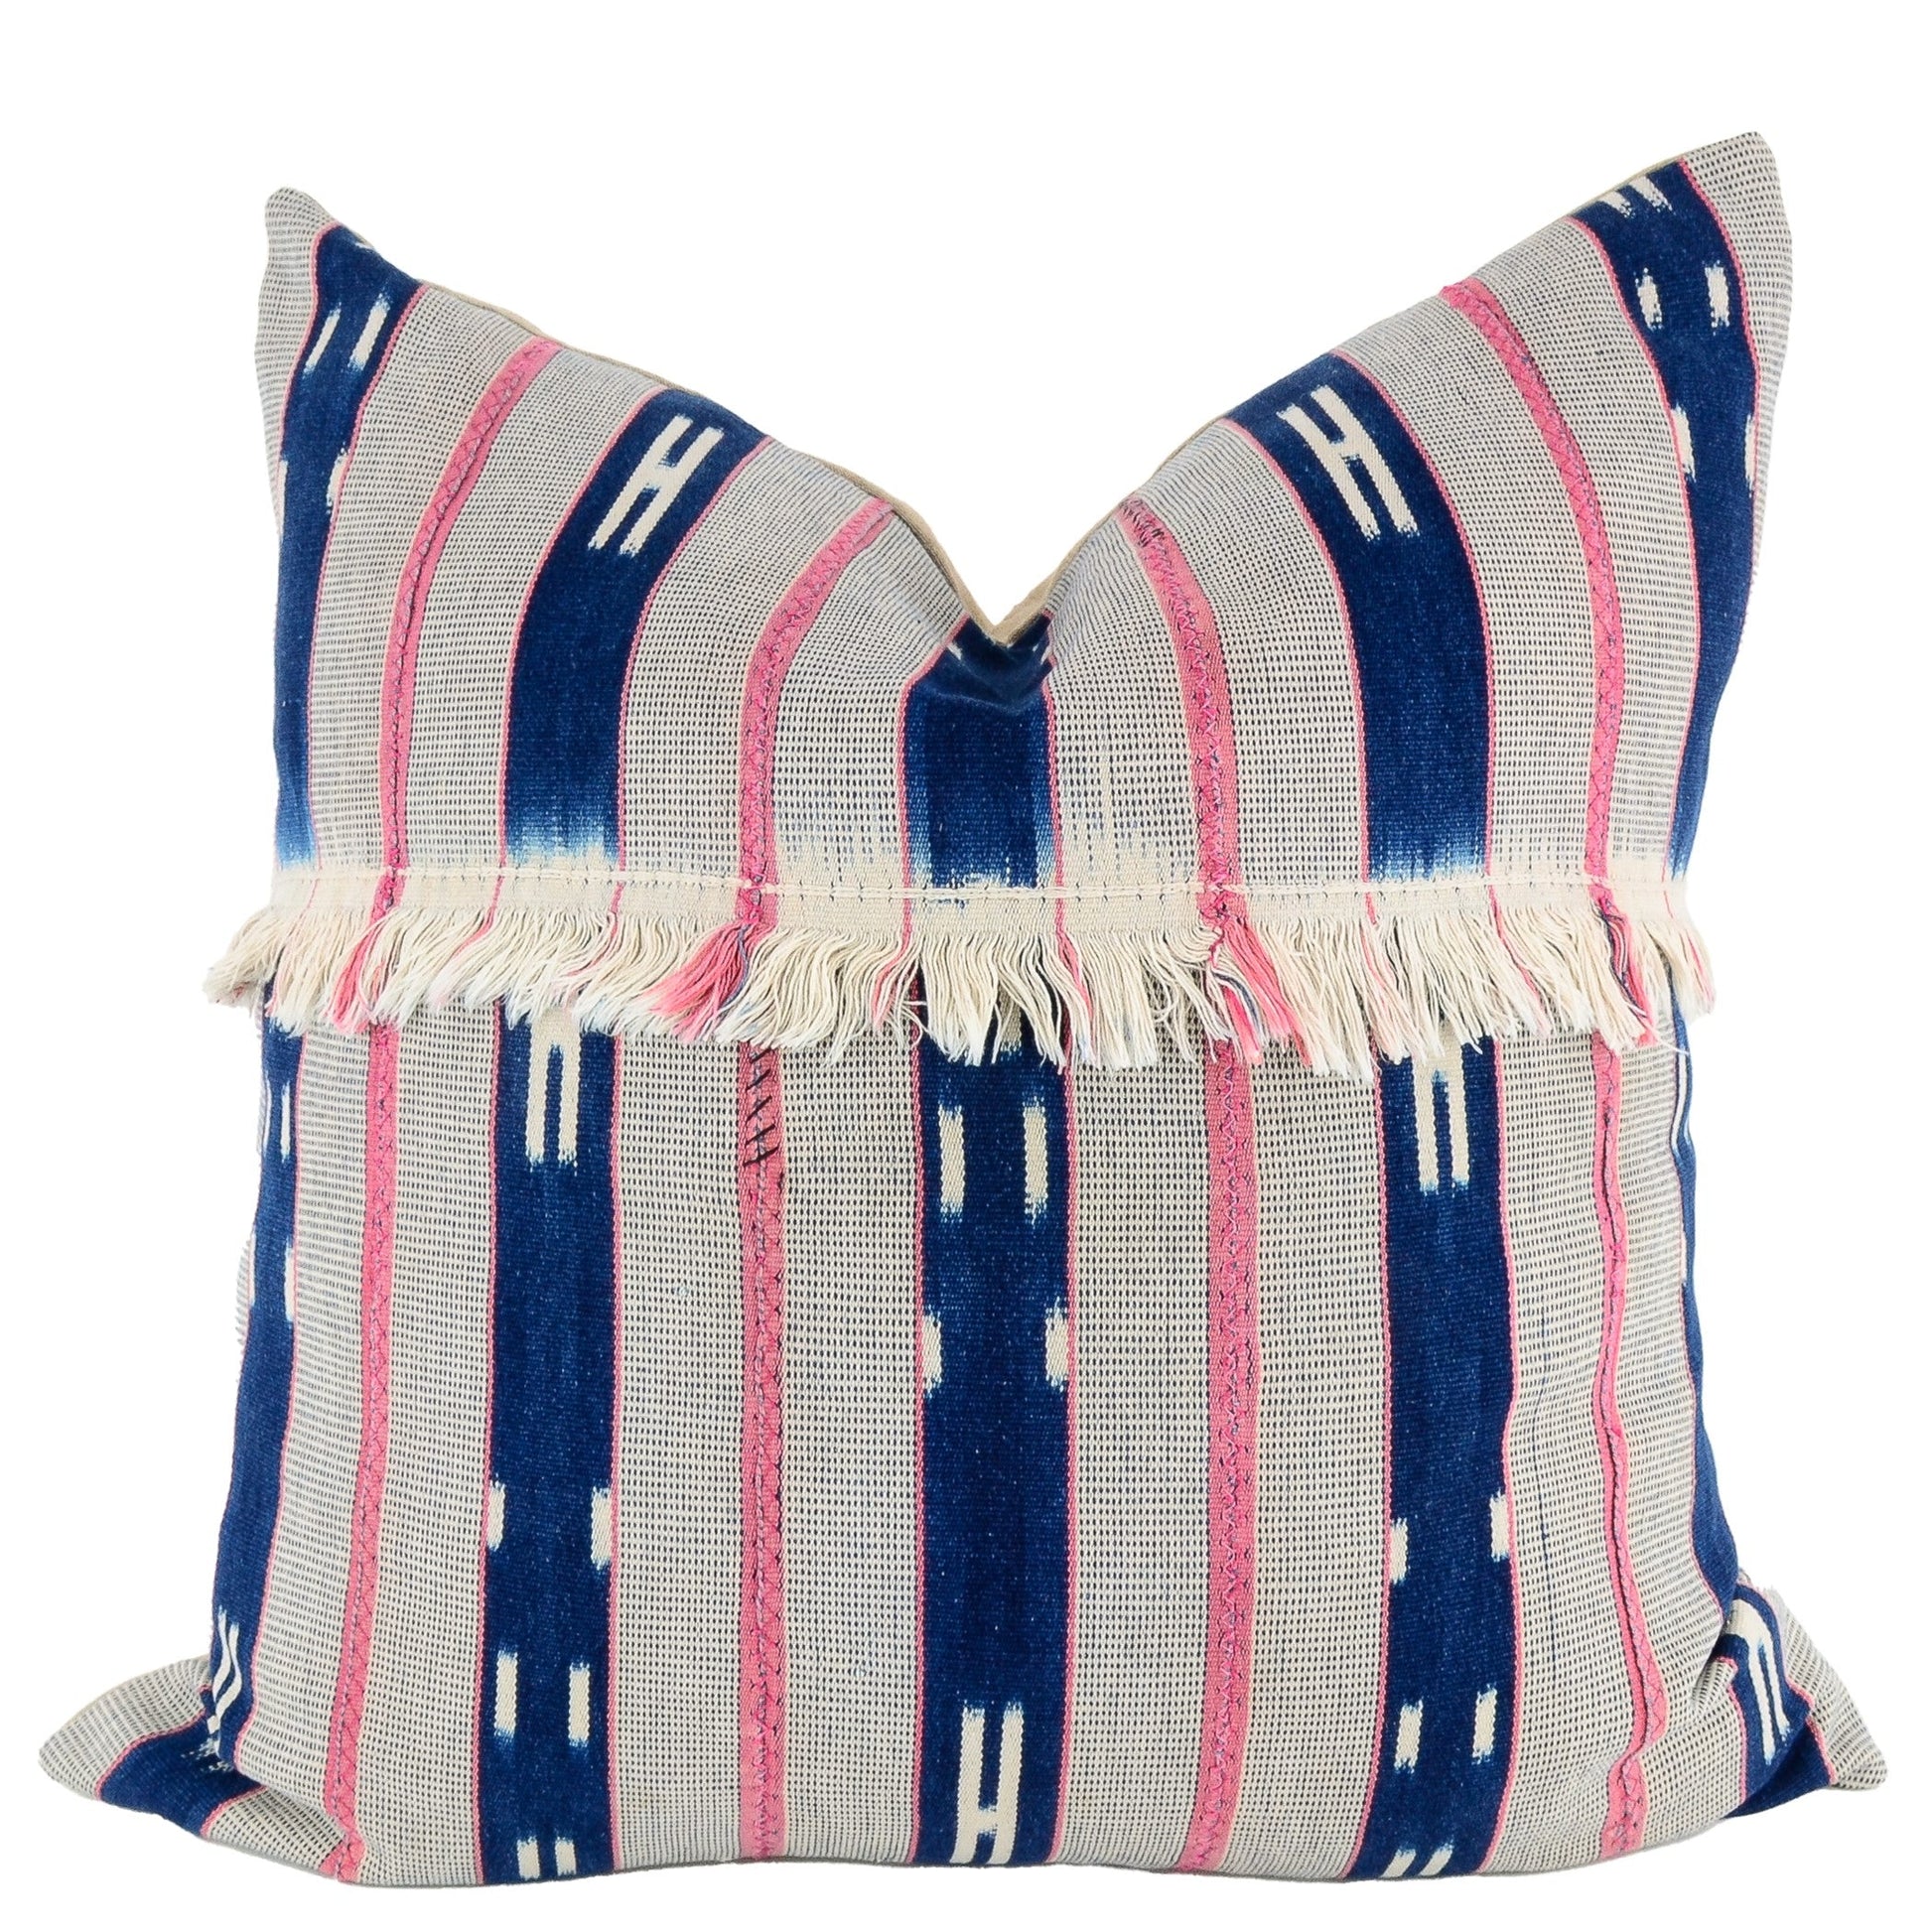 Front of pillow with rich blue and white patterns, gray and pink stripes and white fringe made from vintage handwoven Baoulé/Baule cotton cloth from Africa's Ivory Coast, reflecting the traditions, symbols, and tribal lives of the Baoulé/Baule people